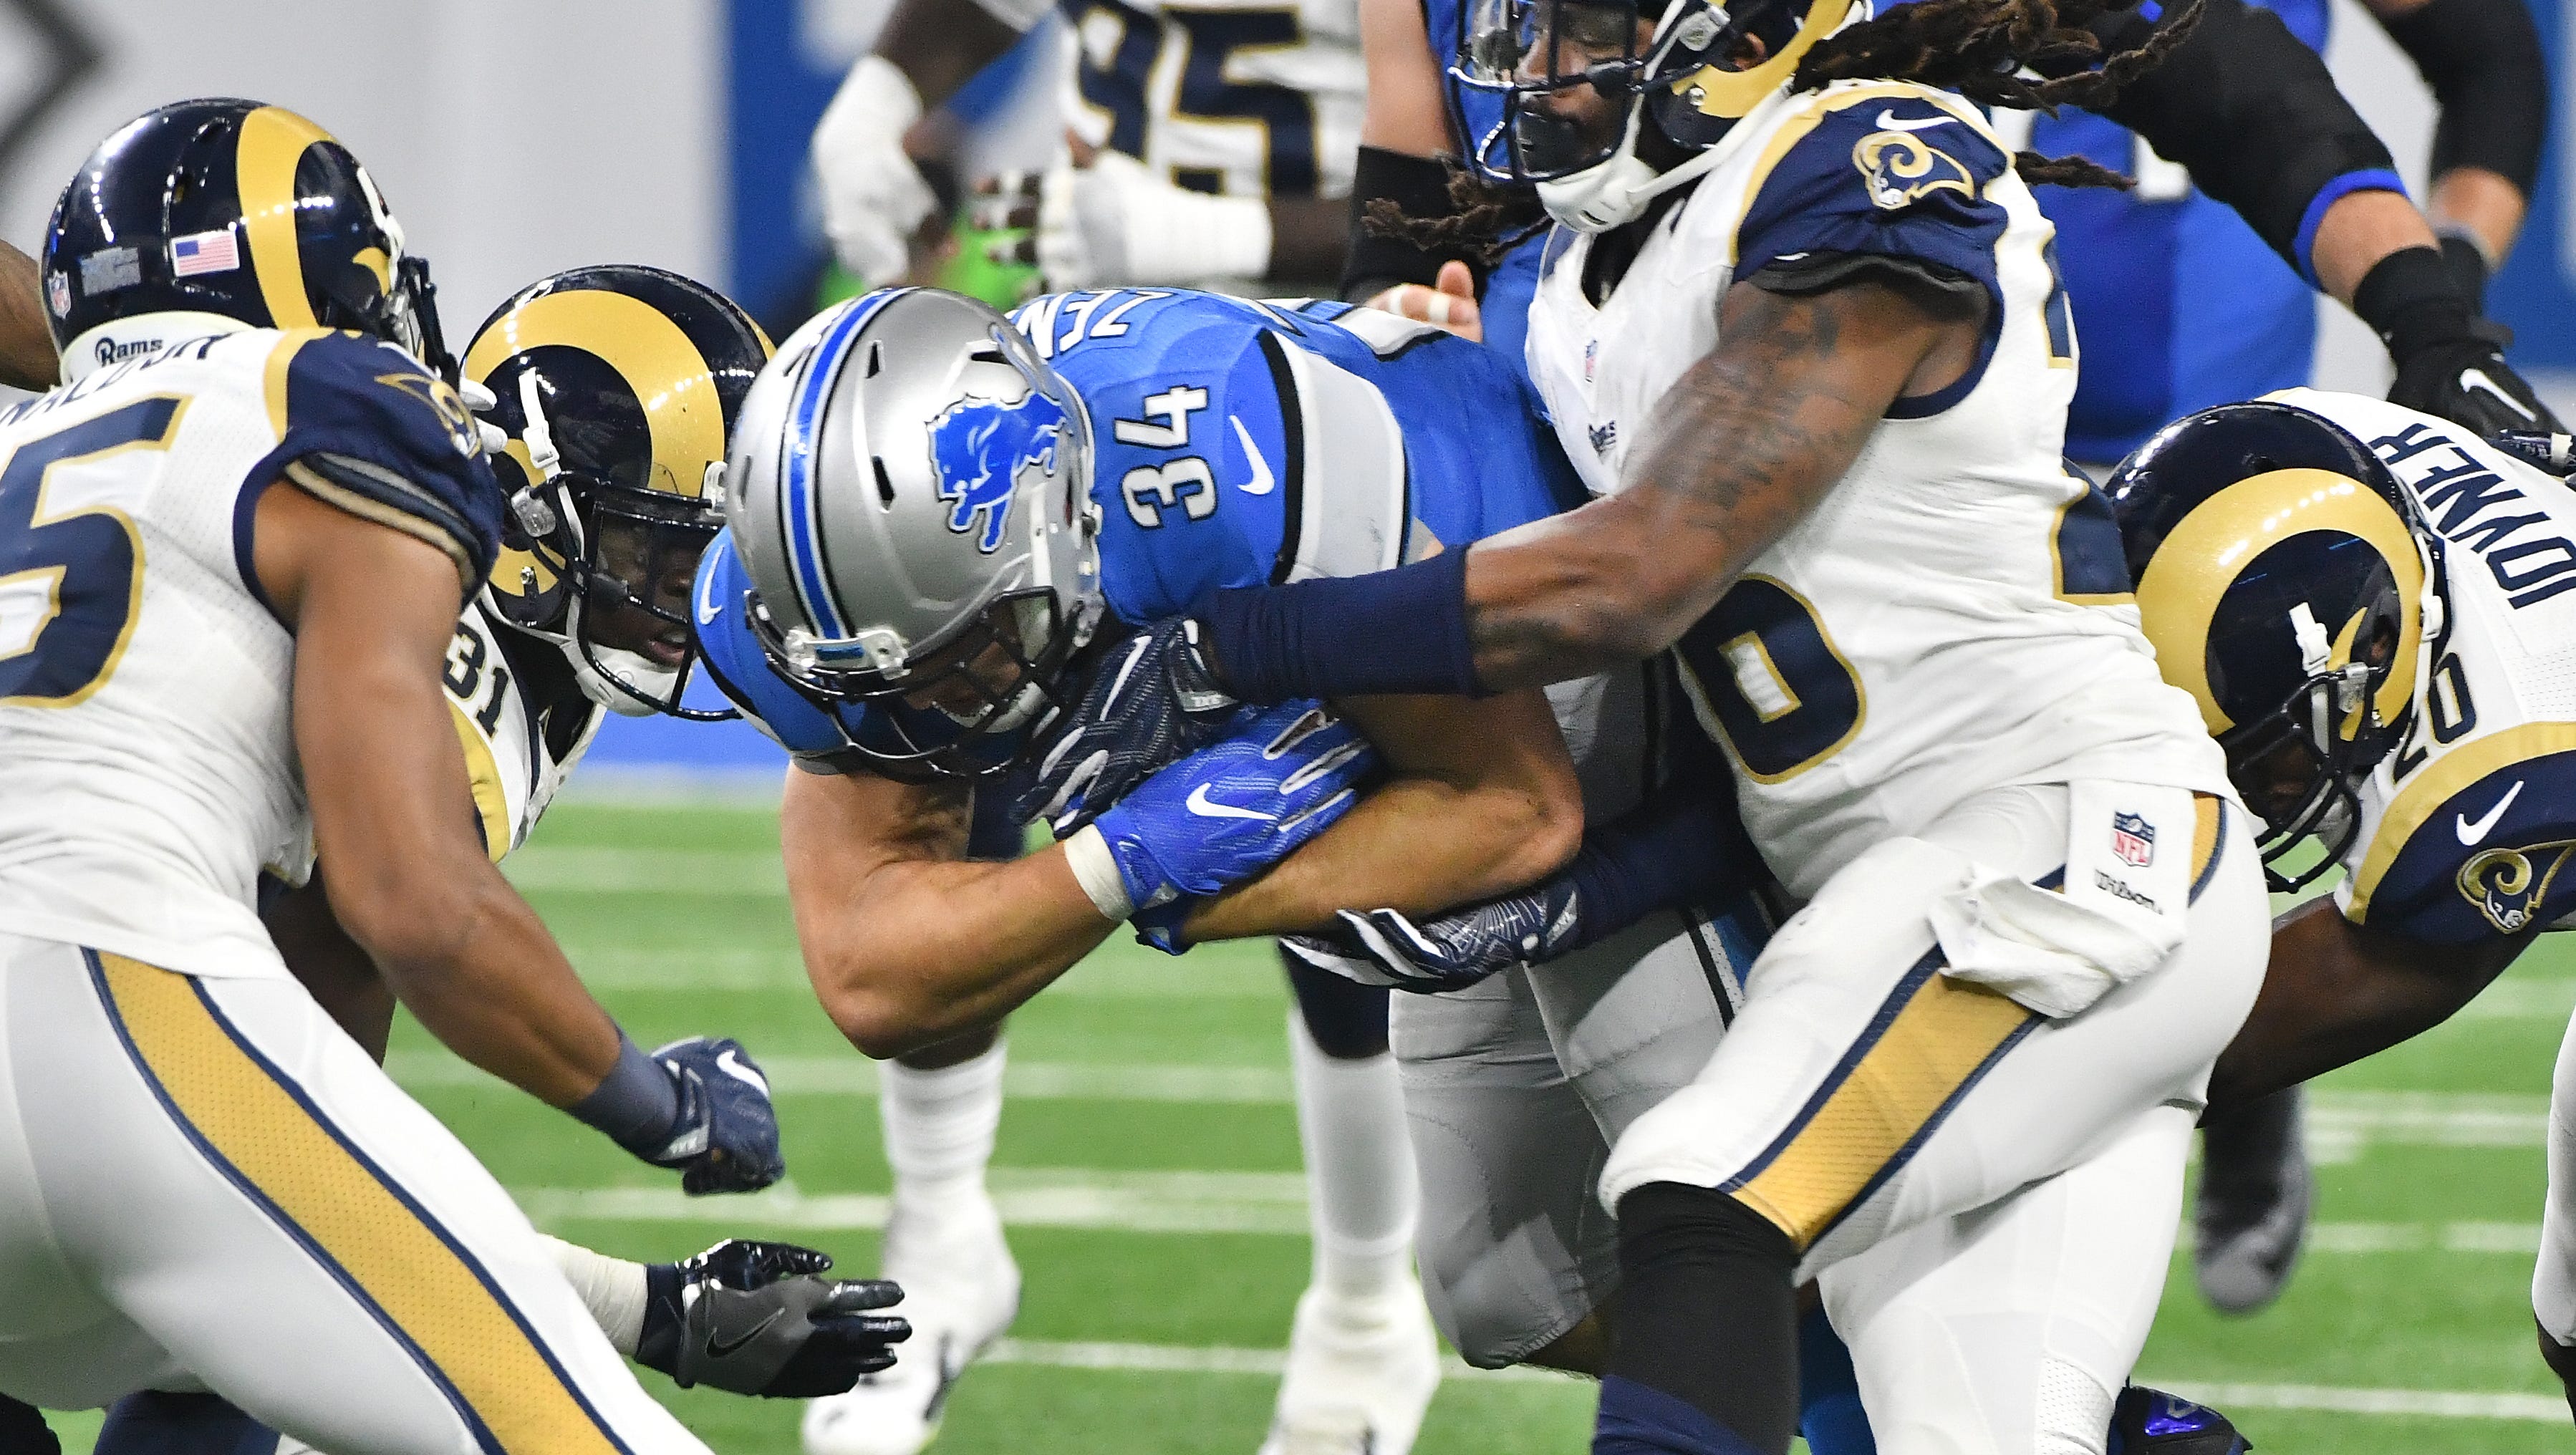 Lions running back Zach Zenner battles with the Rams defense on a gain in the fourth quarter.